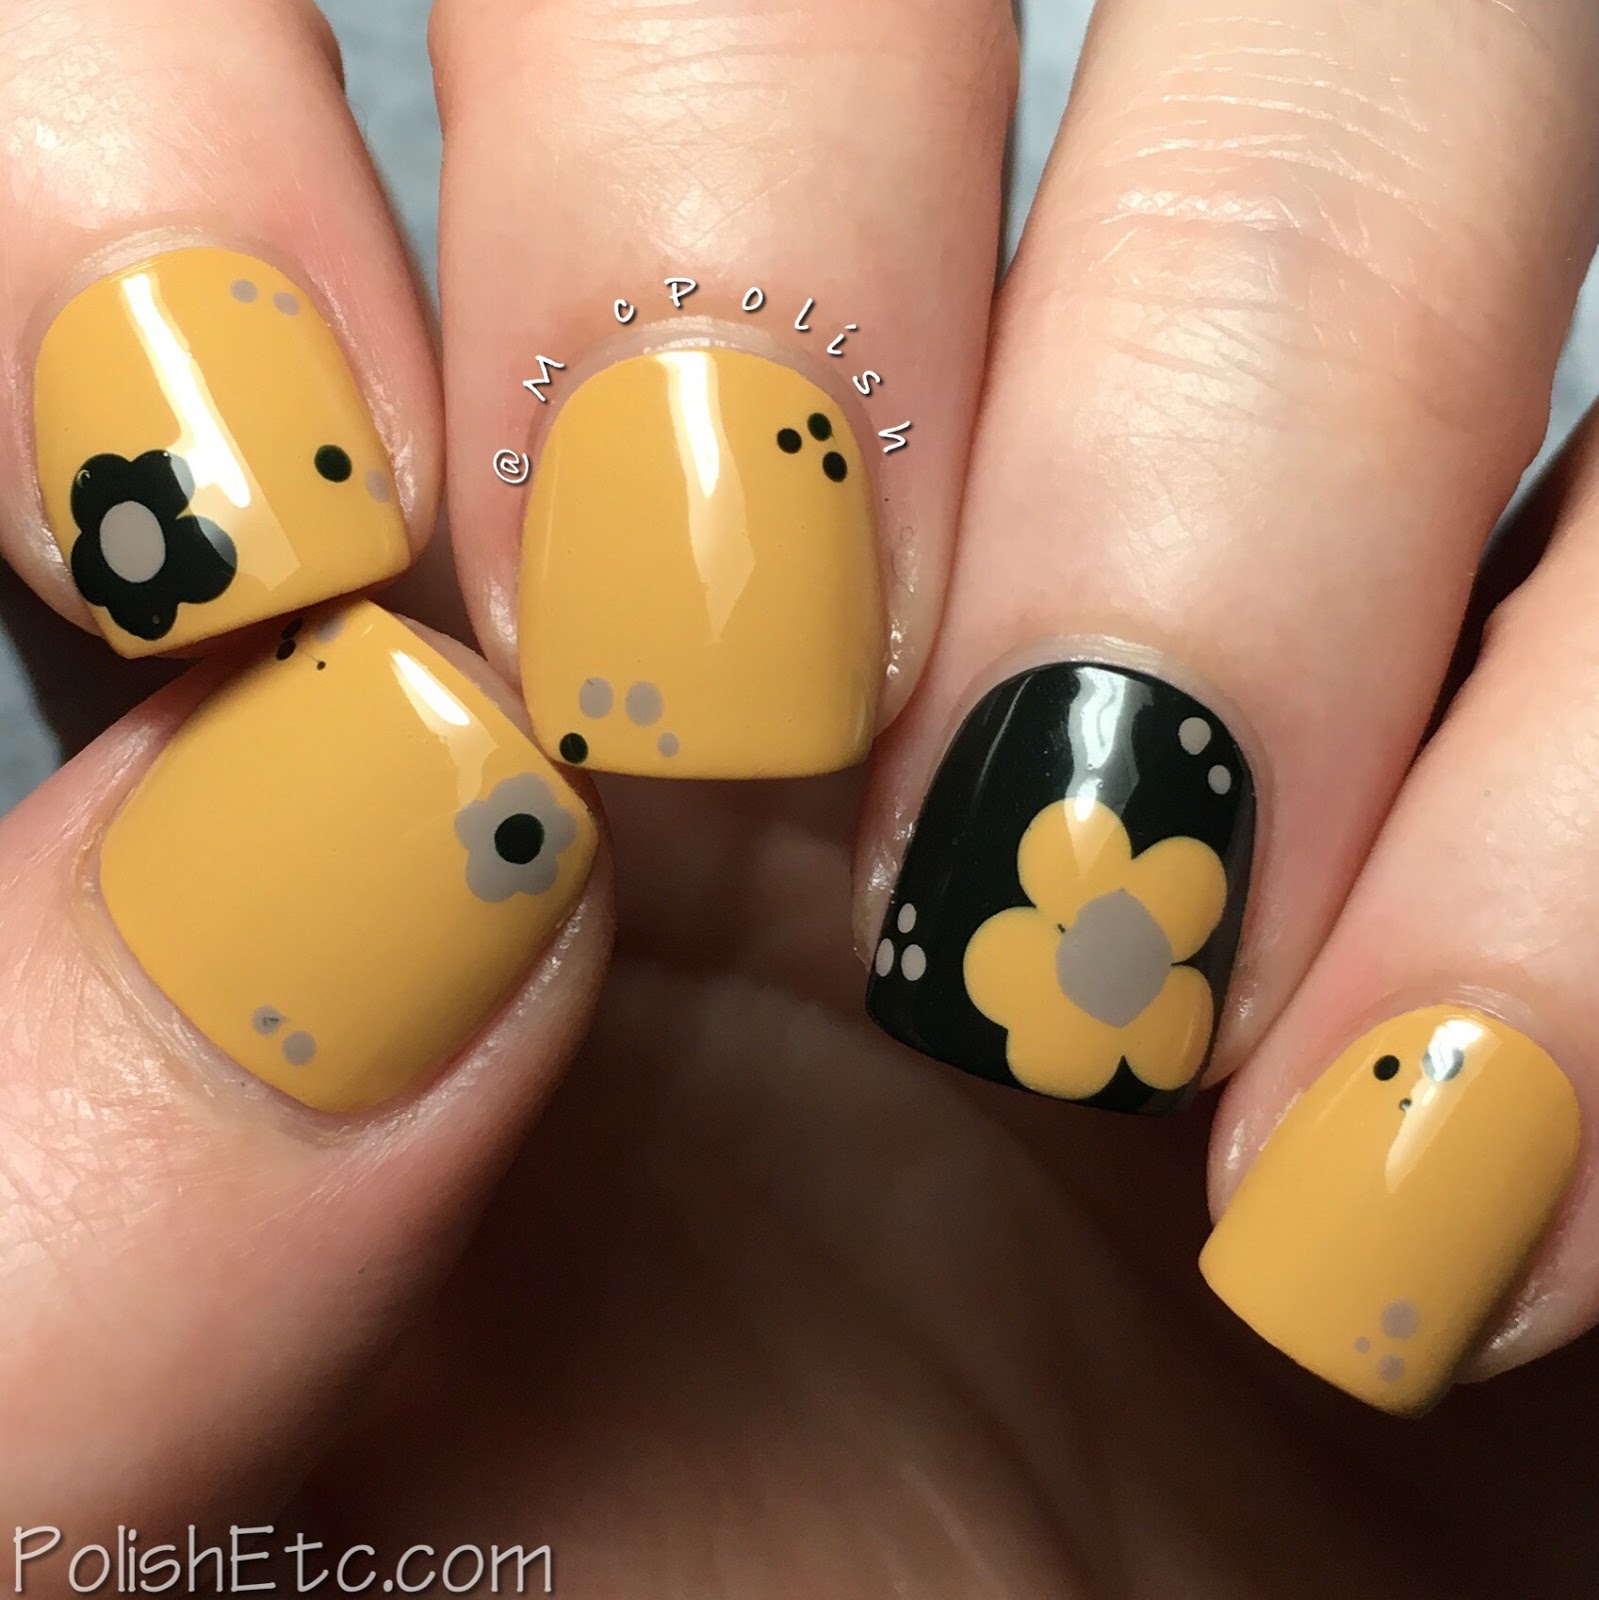 3. Yellow: yellow nails with black bows by Brujawhite on DeviantArt